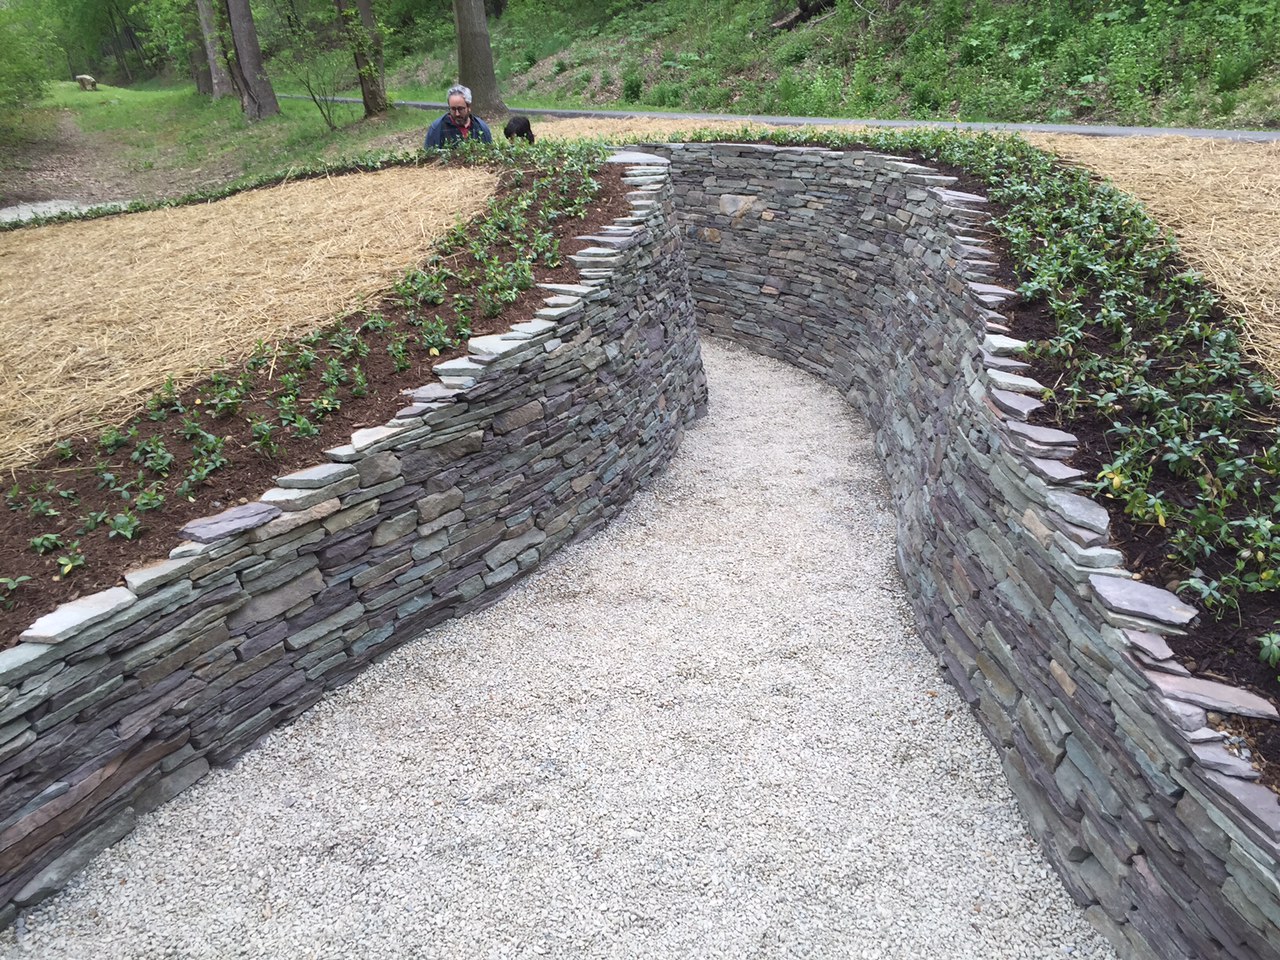 The Water Way installation by Paul Deery using crushed and found stones on the Karl Stirner Arts Trail